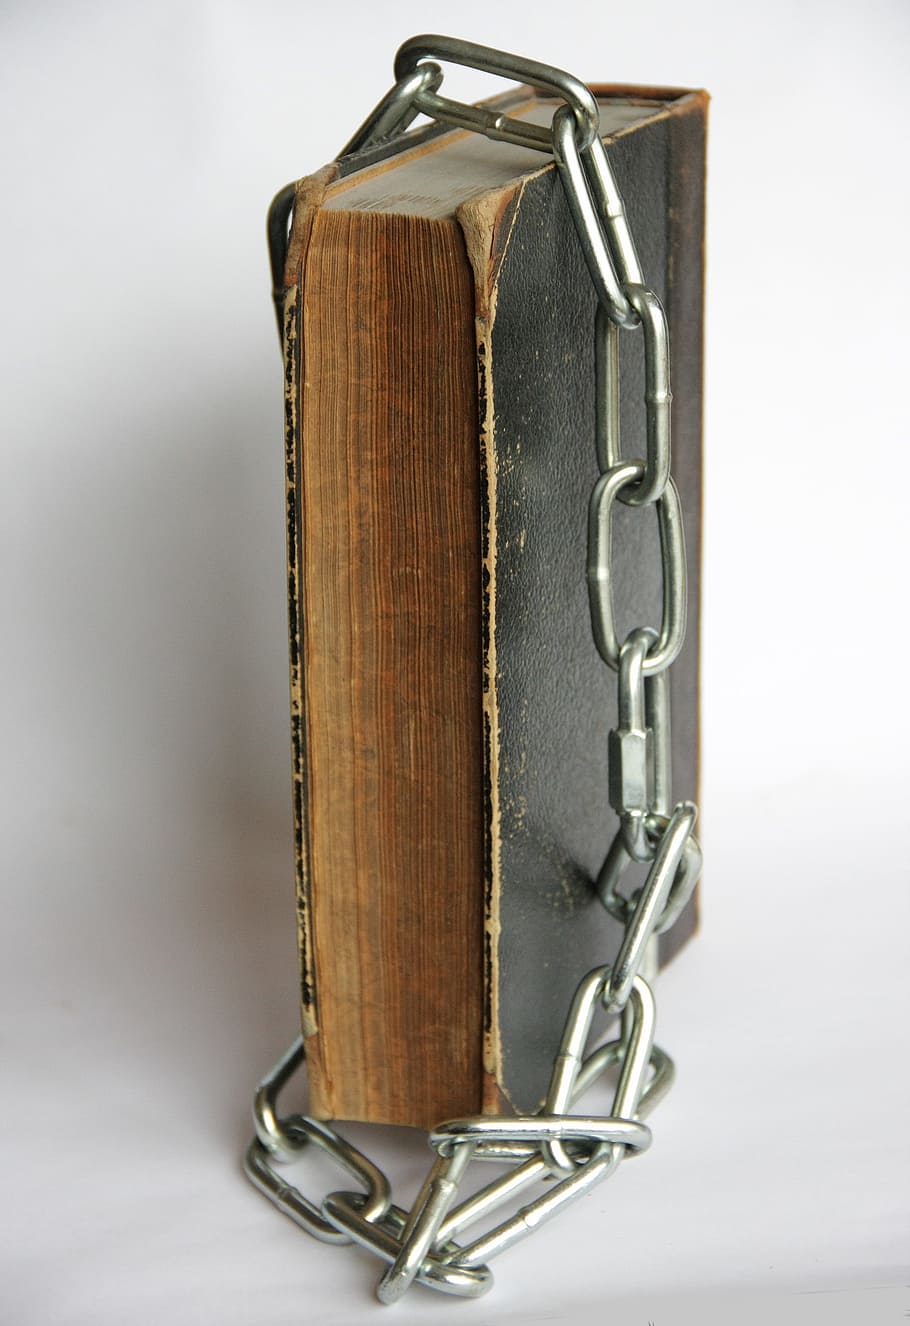 old, antique, book, bible, steel, chain, closed, vintage, metal, paper